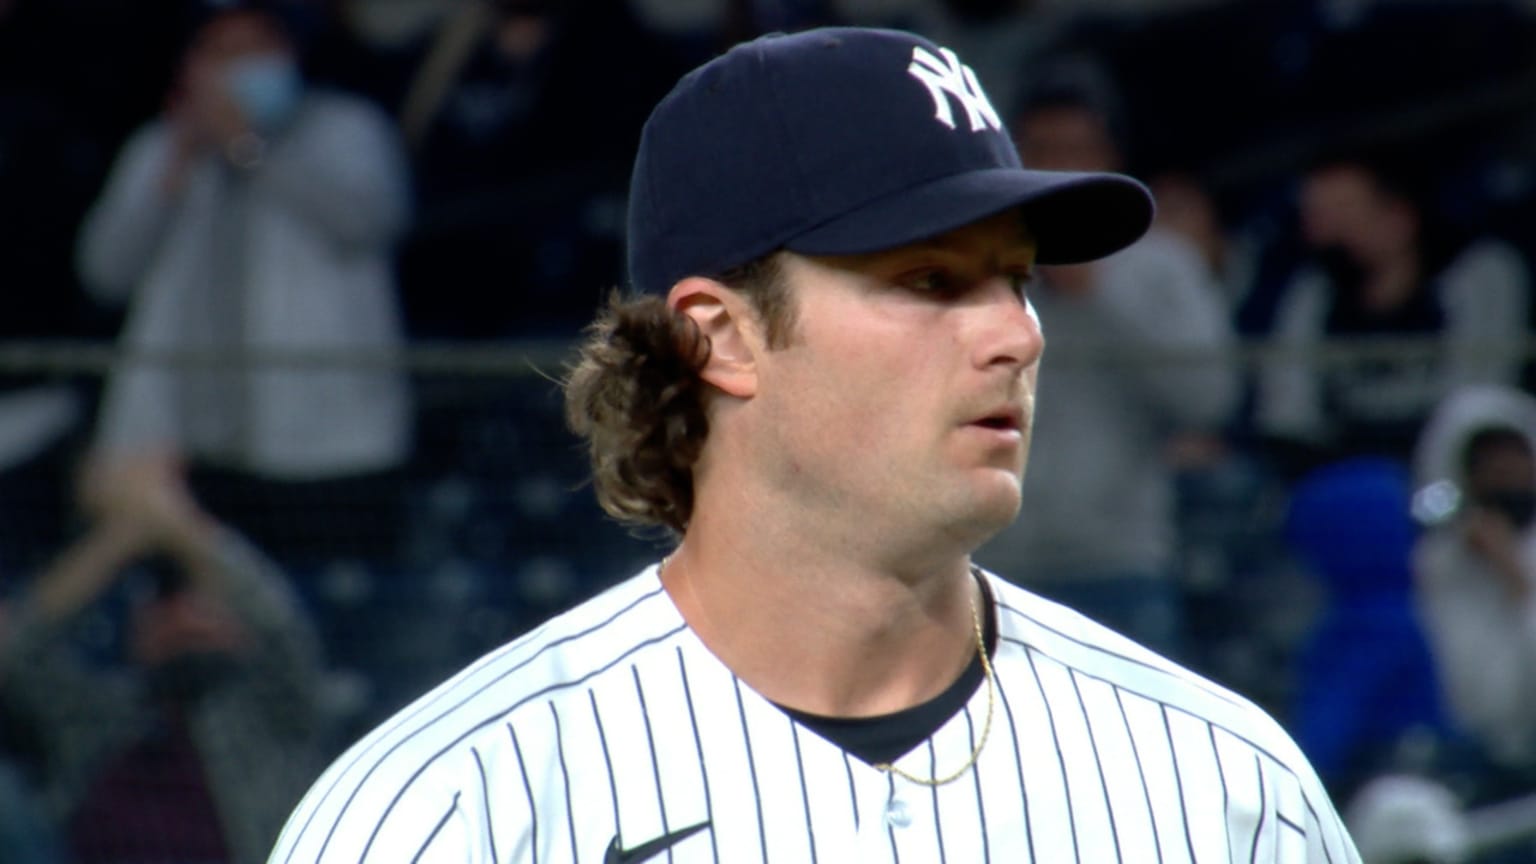 Gerrit Cole News, Biography, MLB Records, Stats & Facts